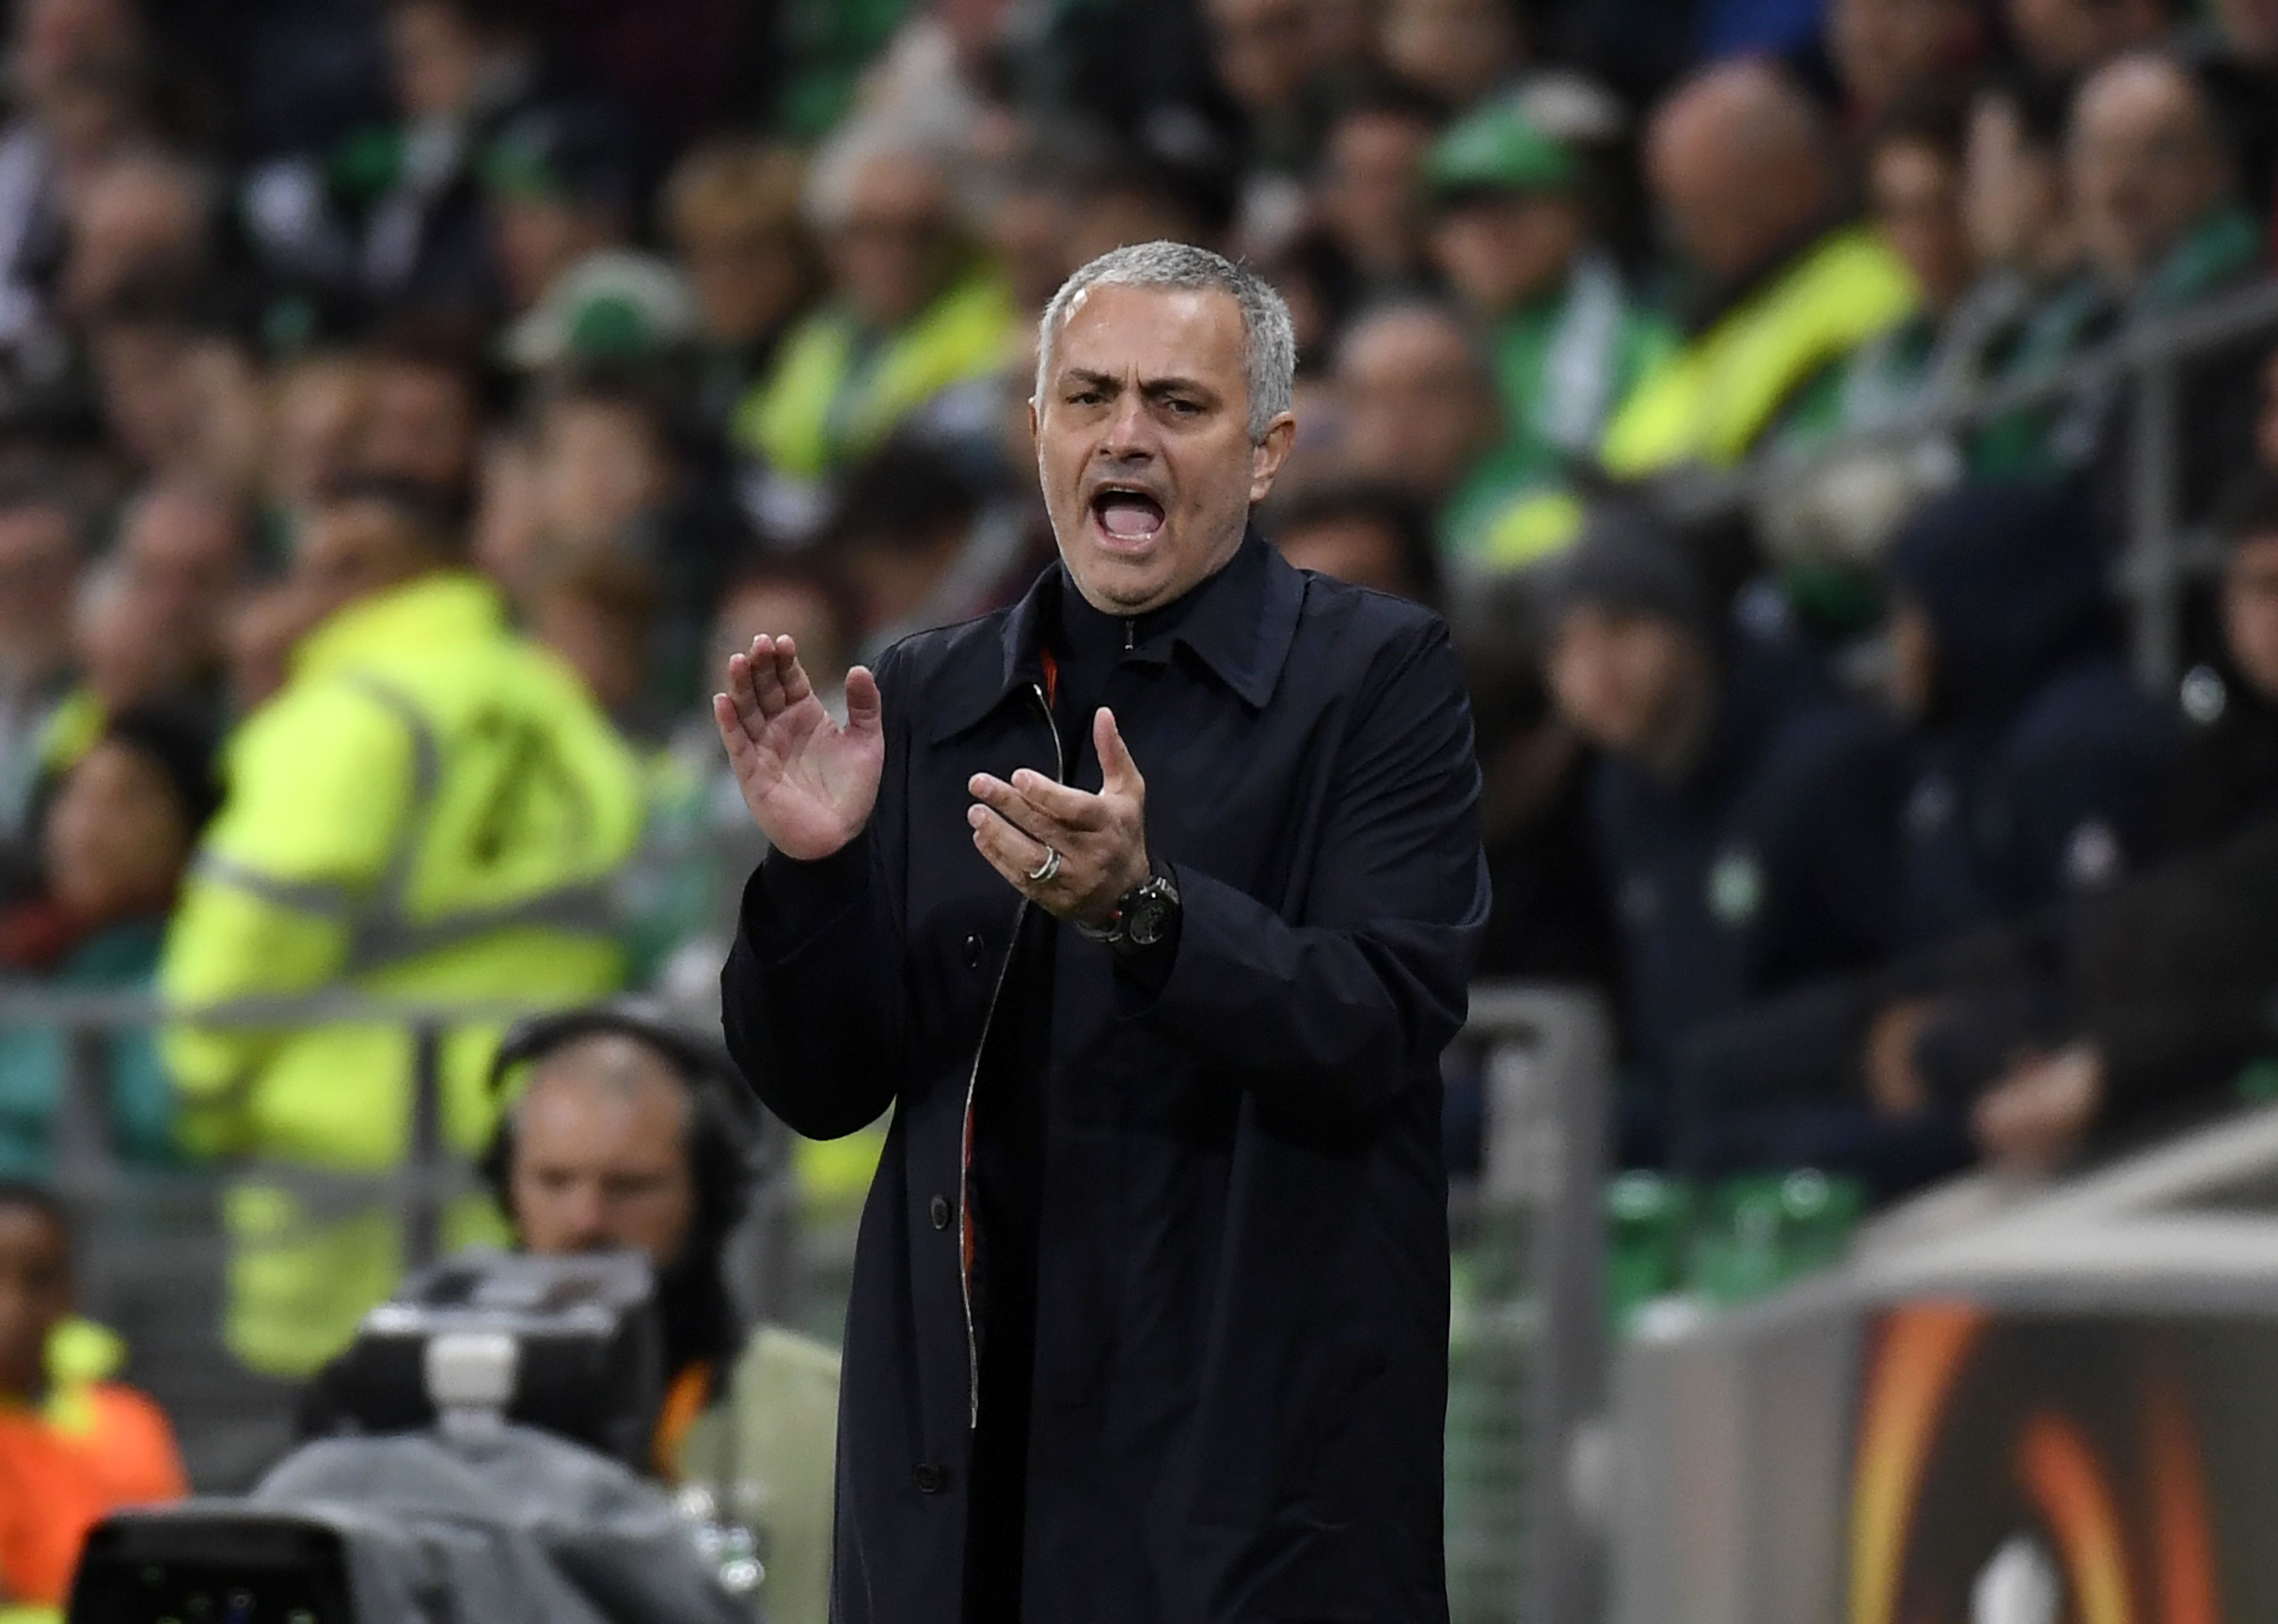 Manchester United's Portuguese coach Jose Mourinho gestures during the UEFA Europa League football match between AS Saint-Etienne and Manchester United on February 22, 2017, at the Geoffroy Guichard stadium in Saint-Etienne, central France. / AFP / PHILIPPE DESMAZES        (Photo credit should read PHILIPPE DESMAZES/AFP/Getty Images)